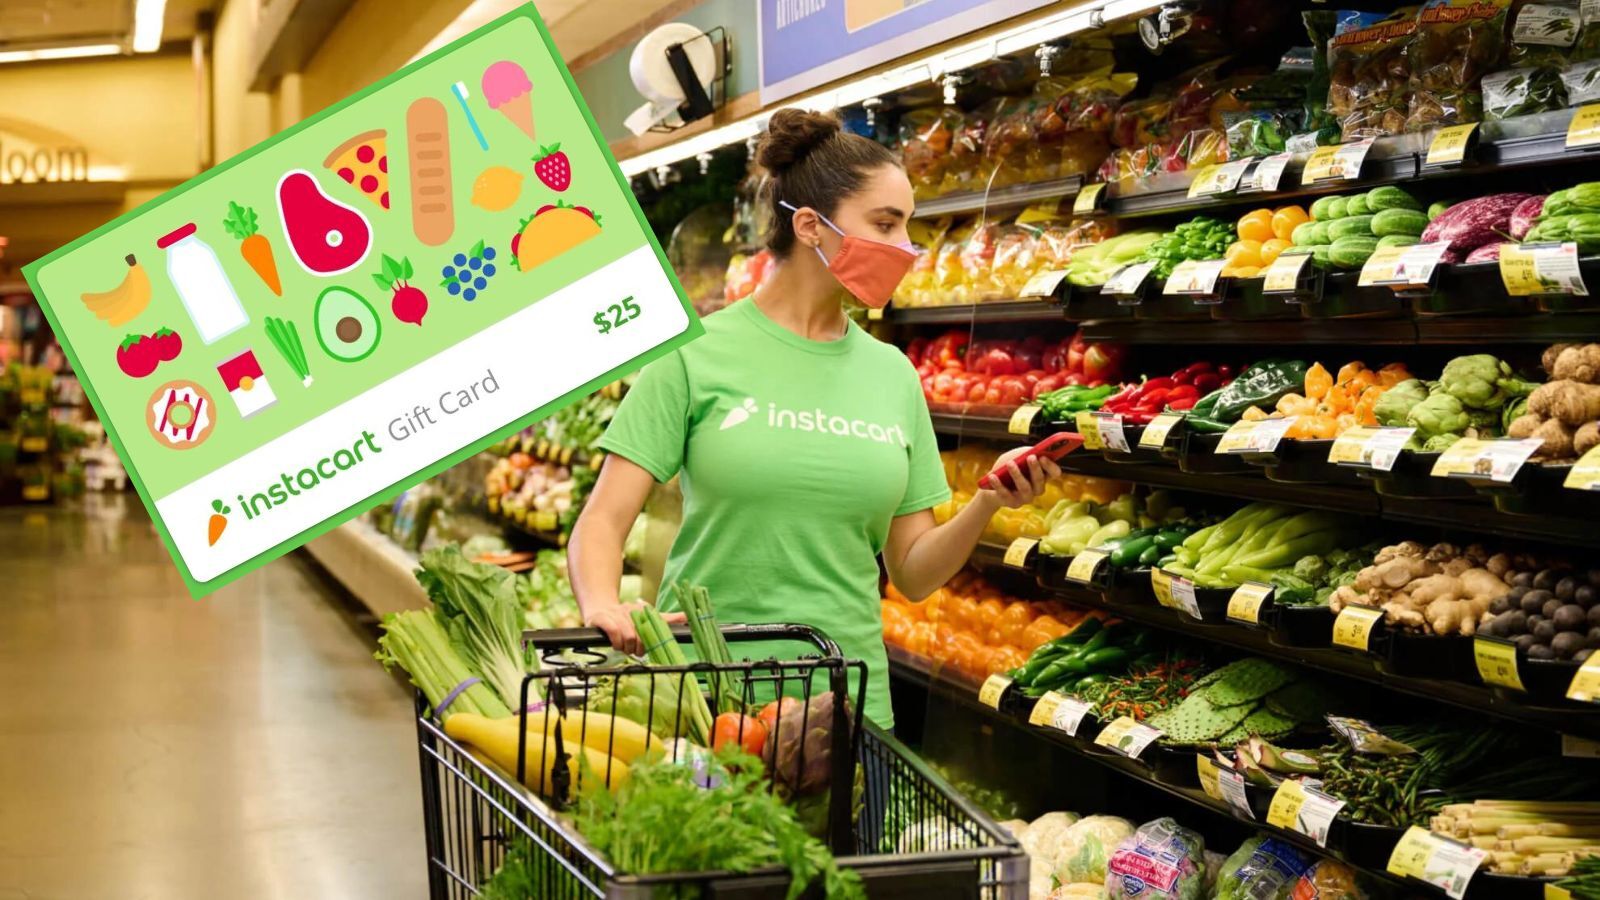 Instacart Gift Cards - Everything You Need to Know!